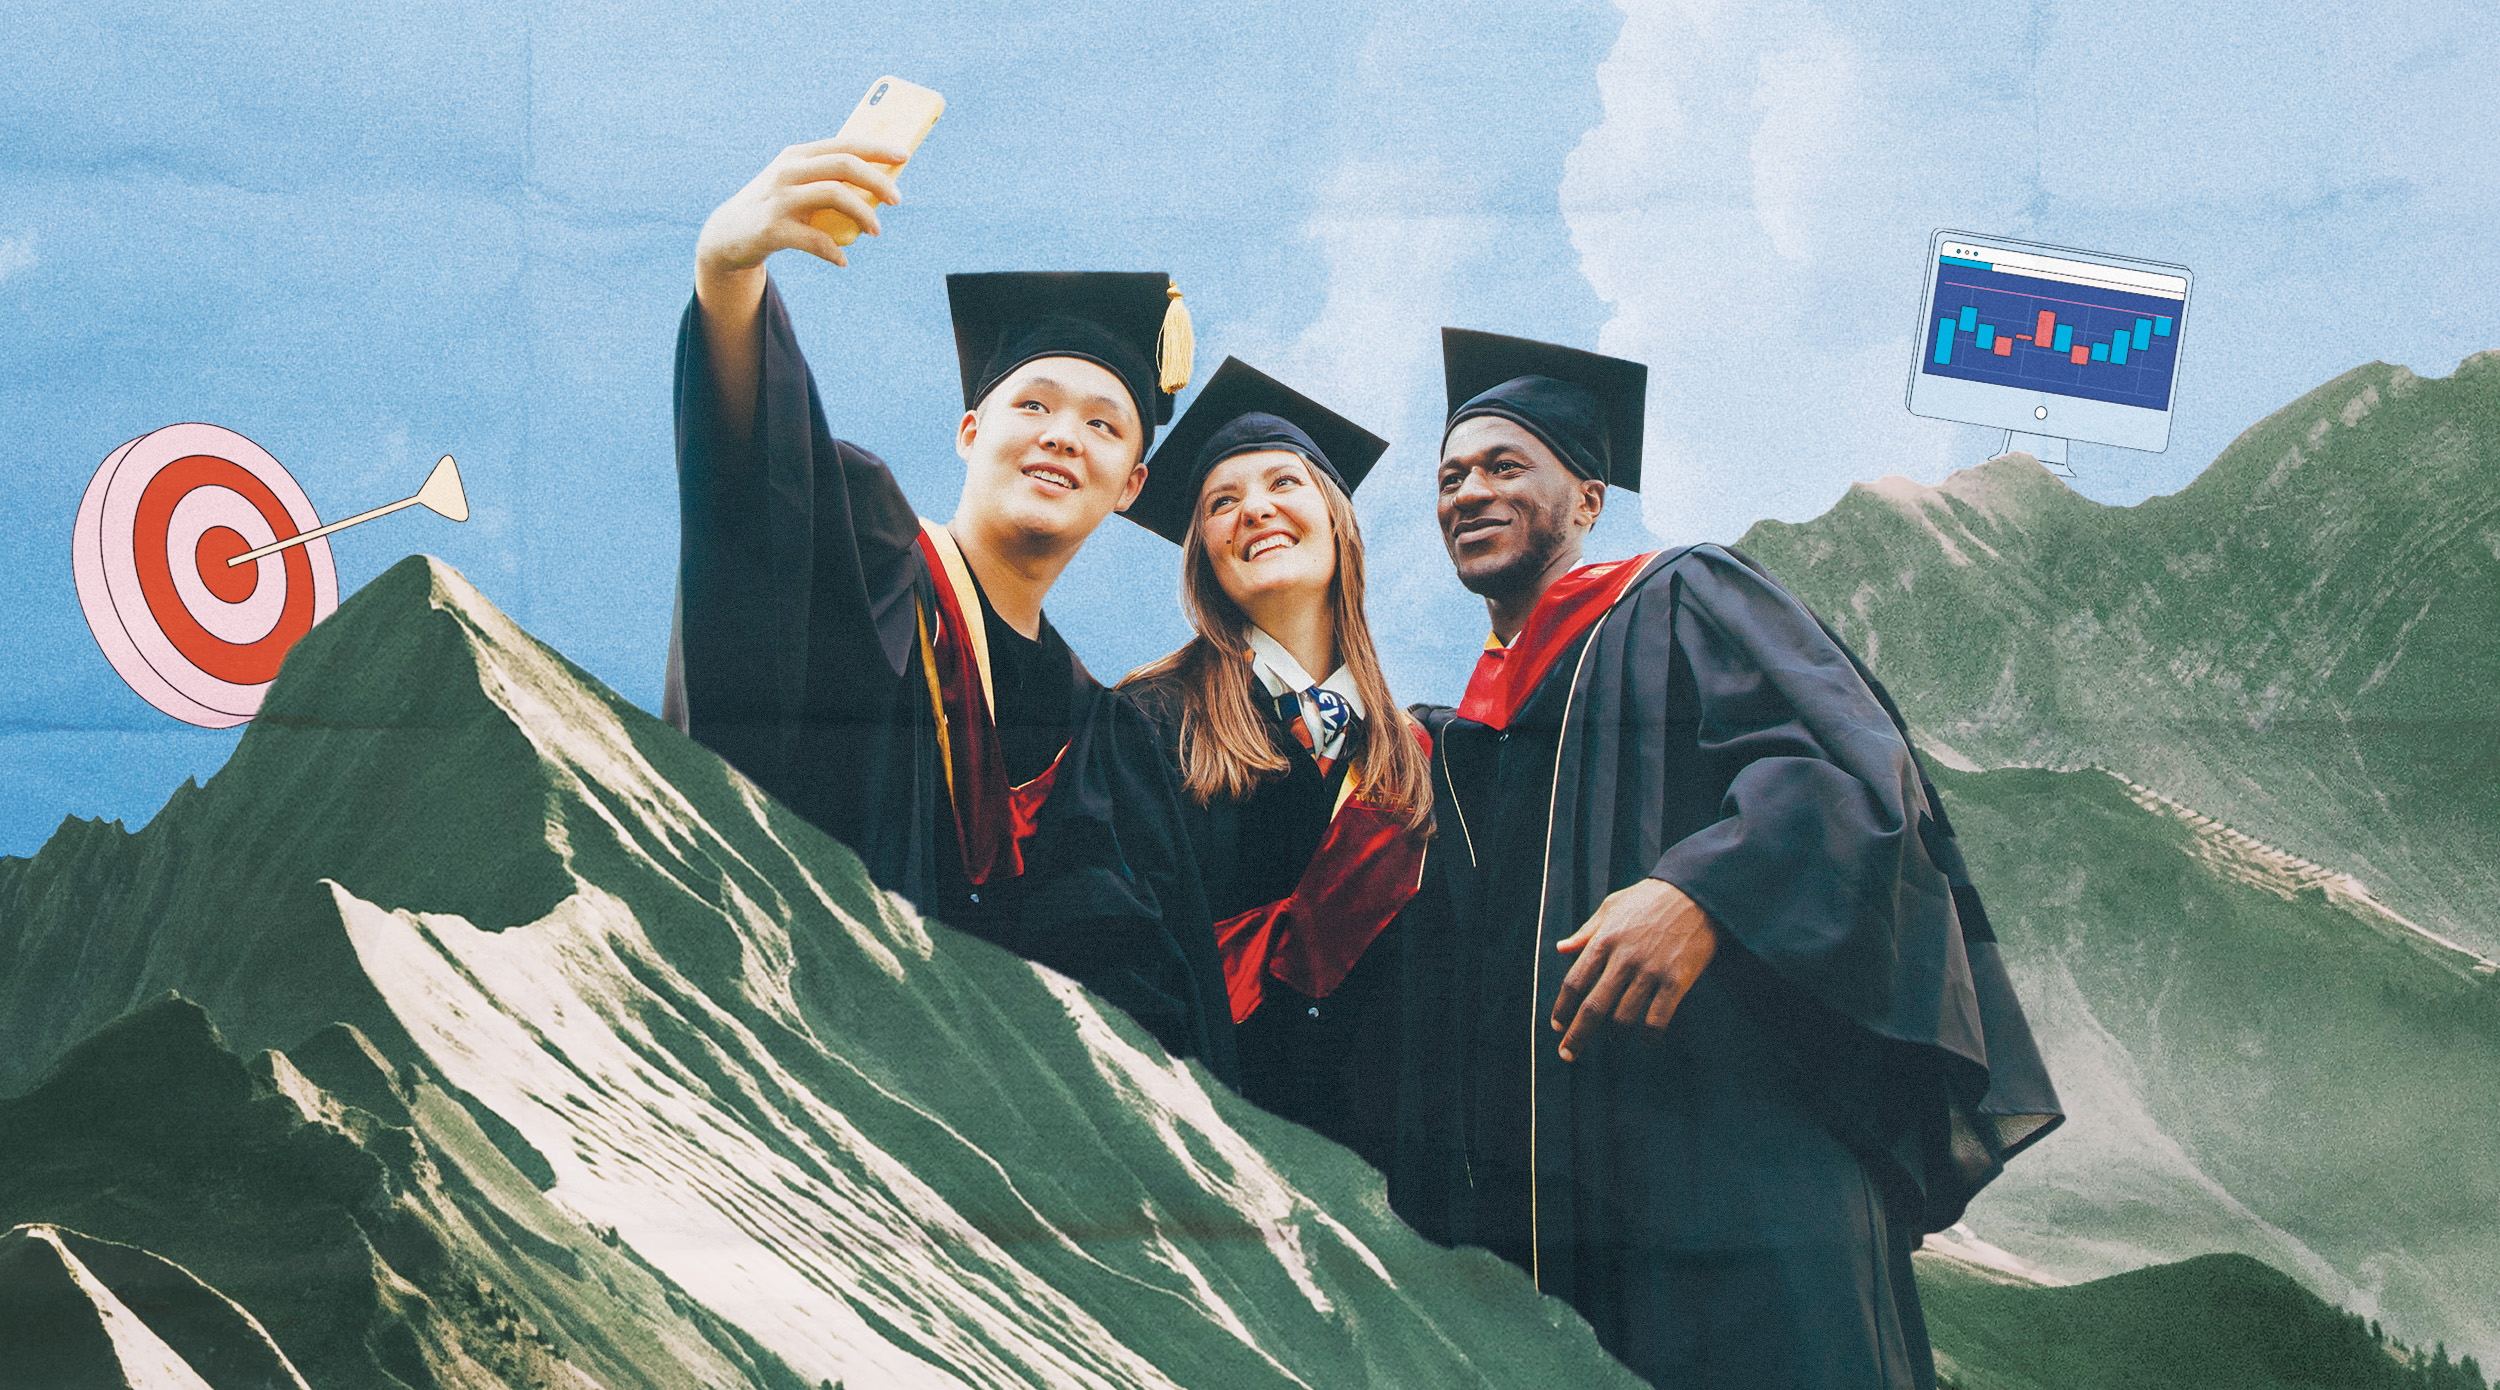 A picture of three students taking a selfie in graduation cap and gowns surrounded by a mountain landscape and an icon of a dartboard and computer.